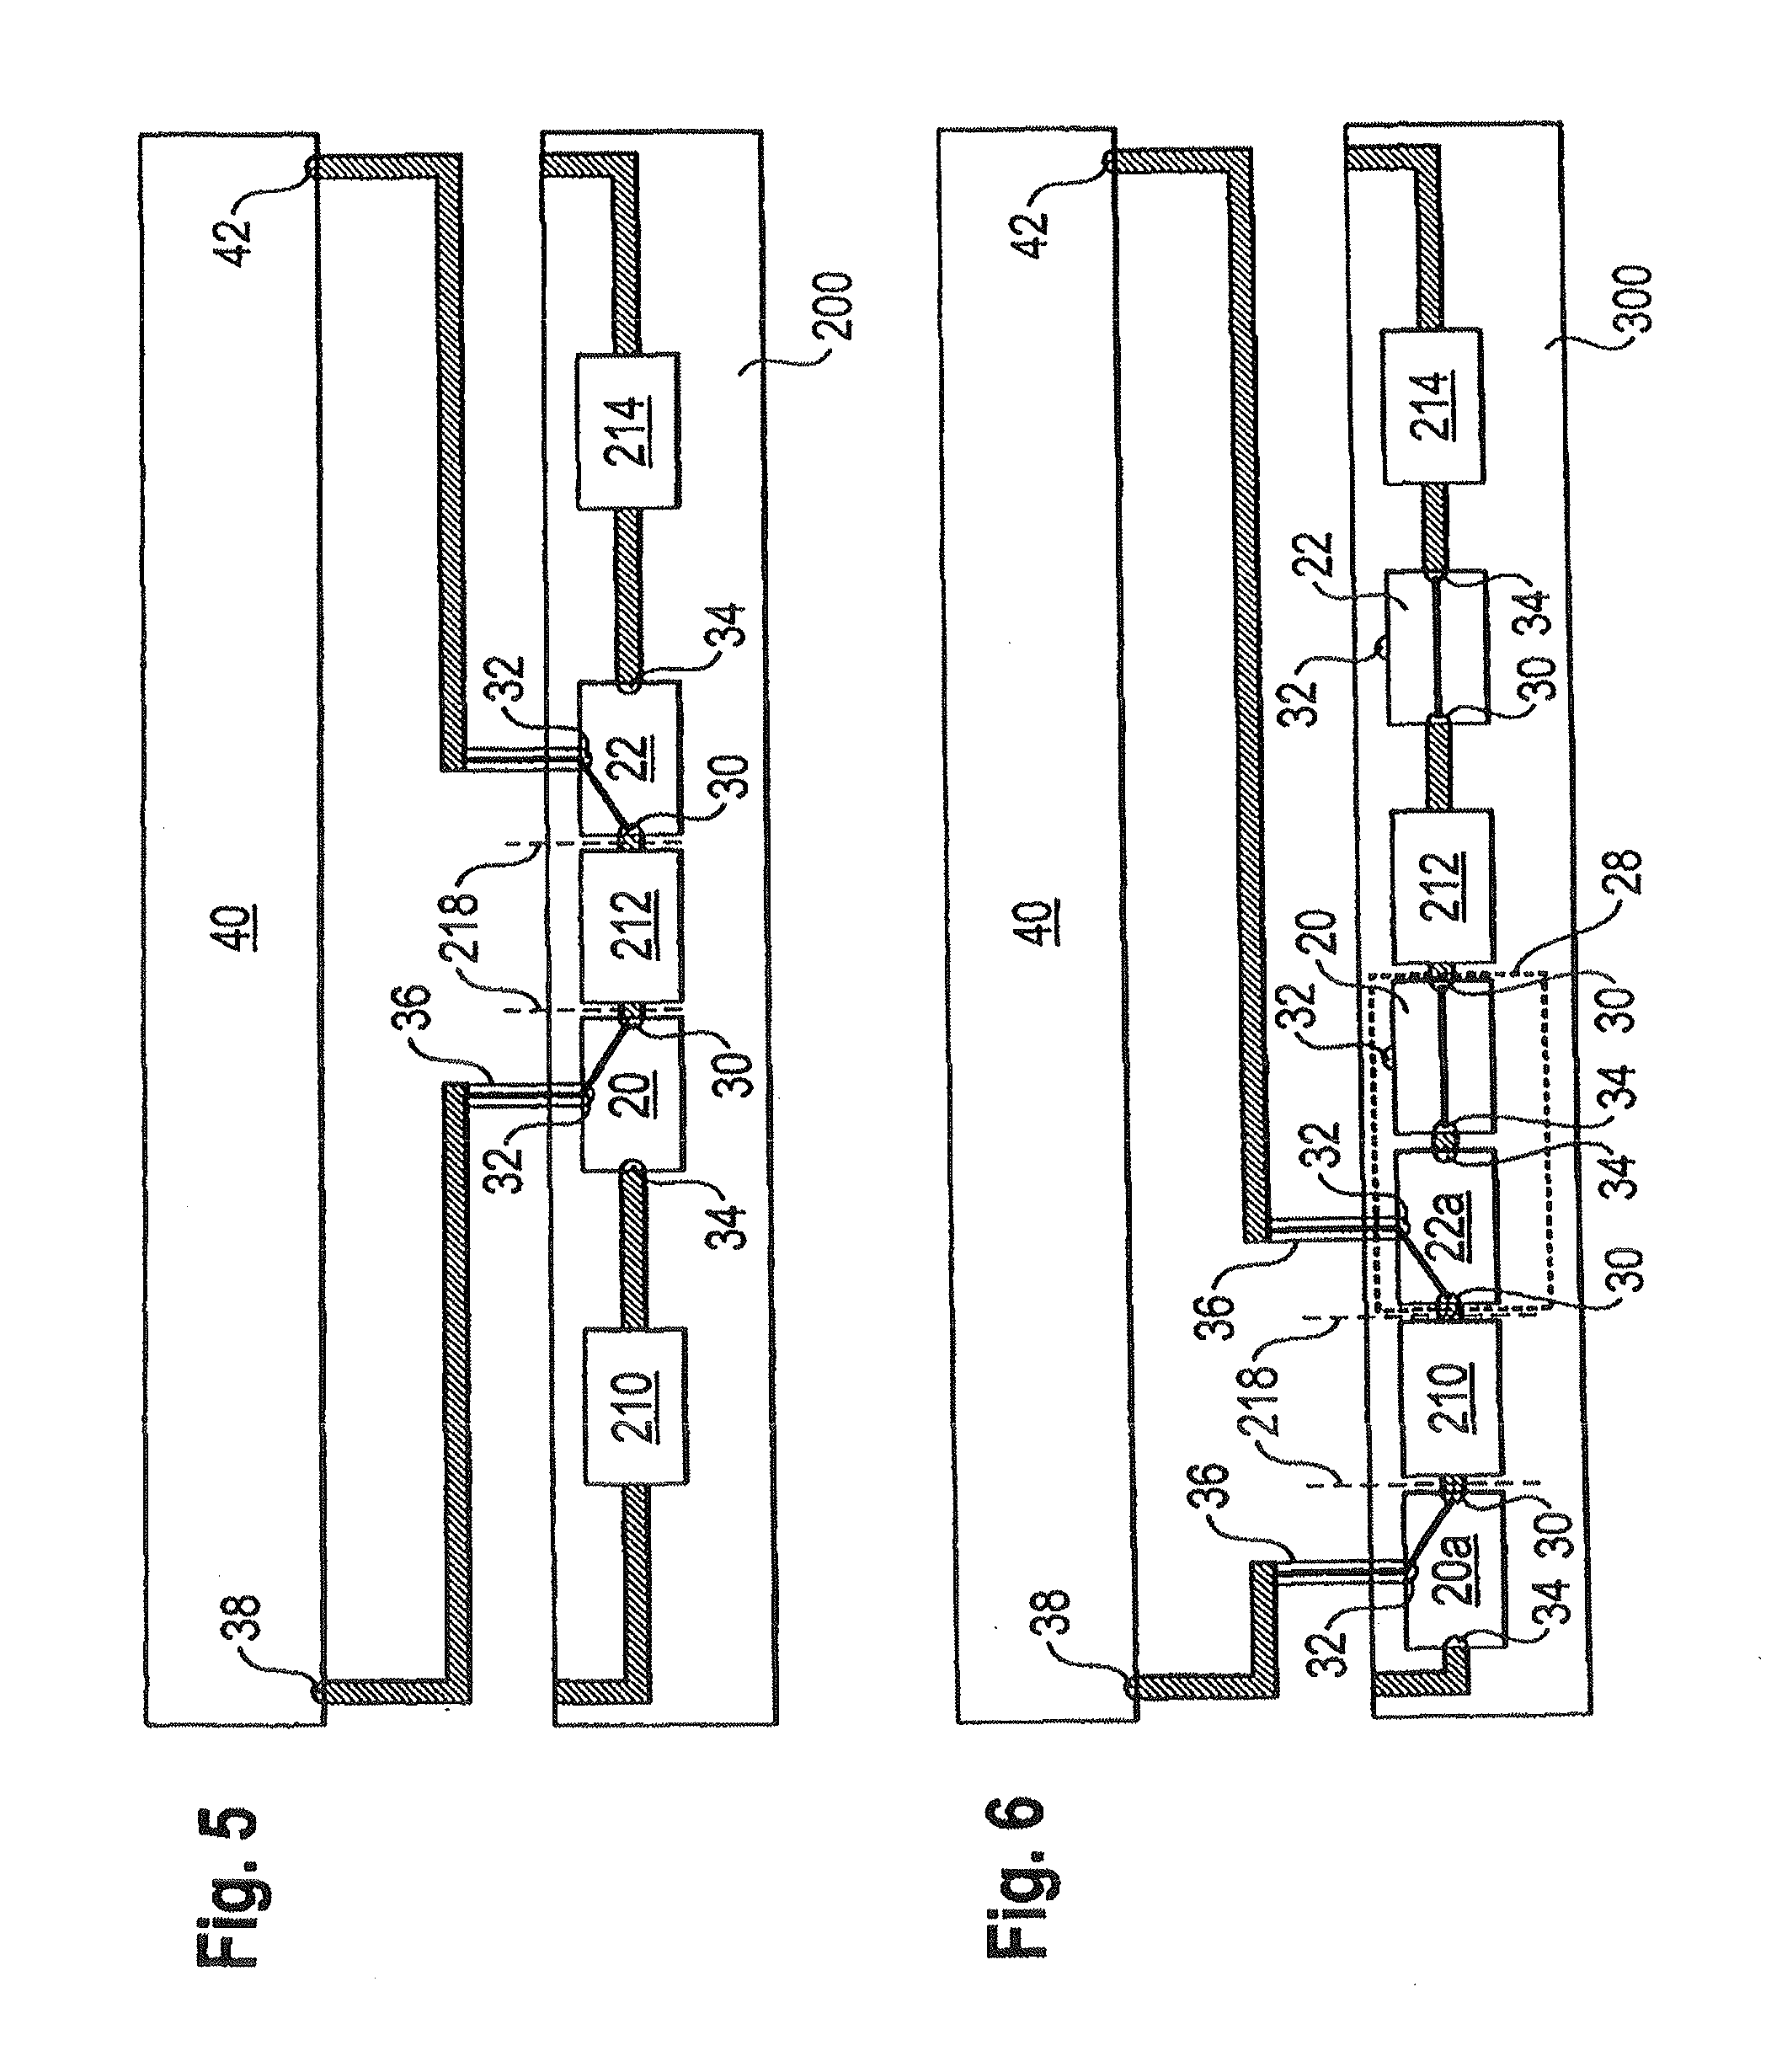 Measurement arrangement having a calibration substrate and electronic circuit